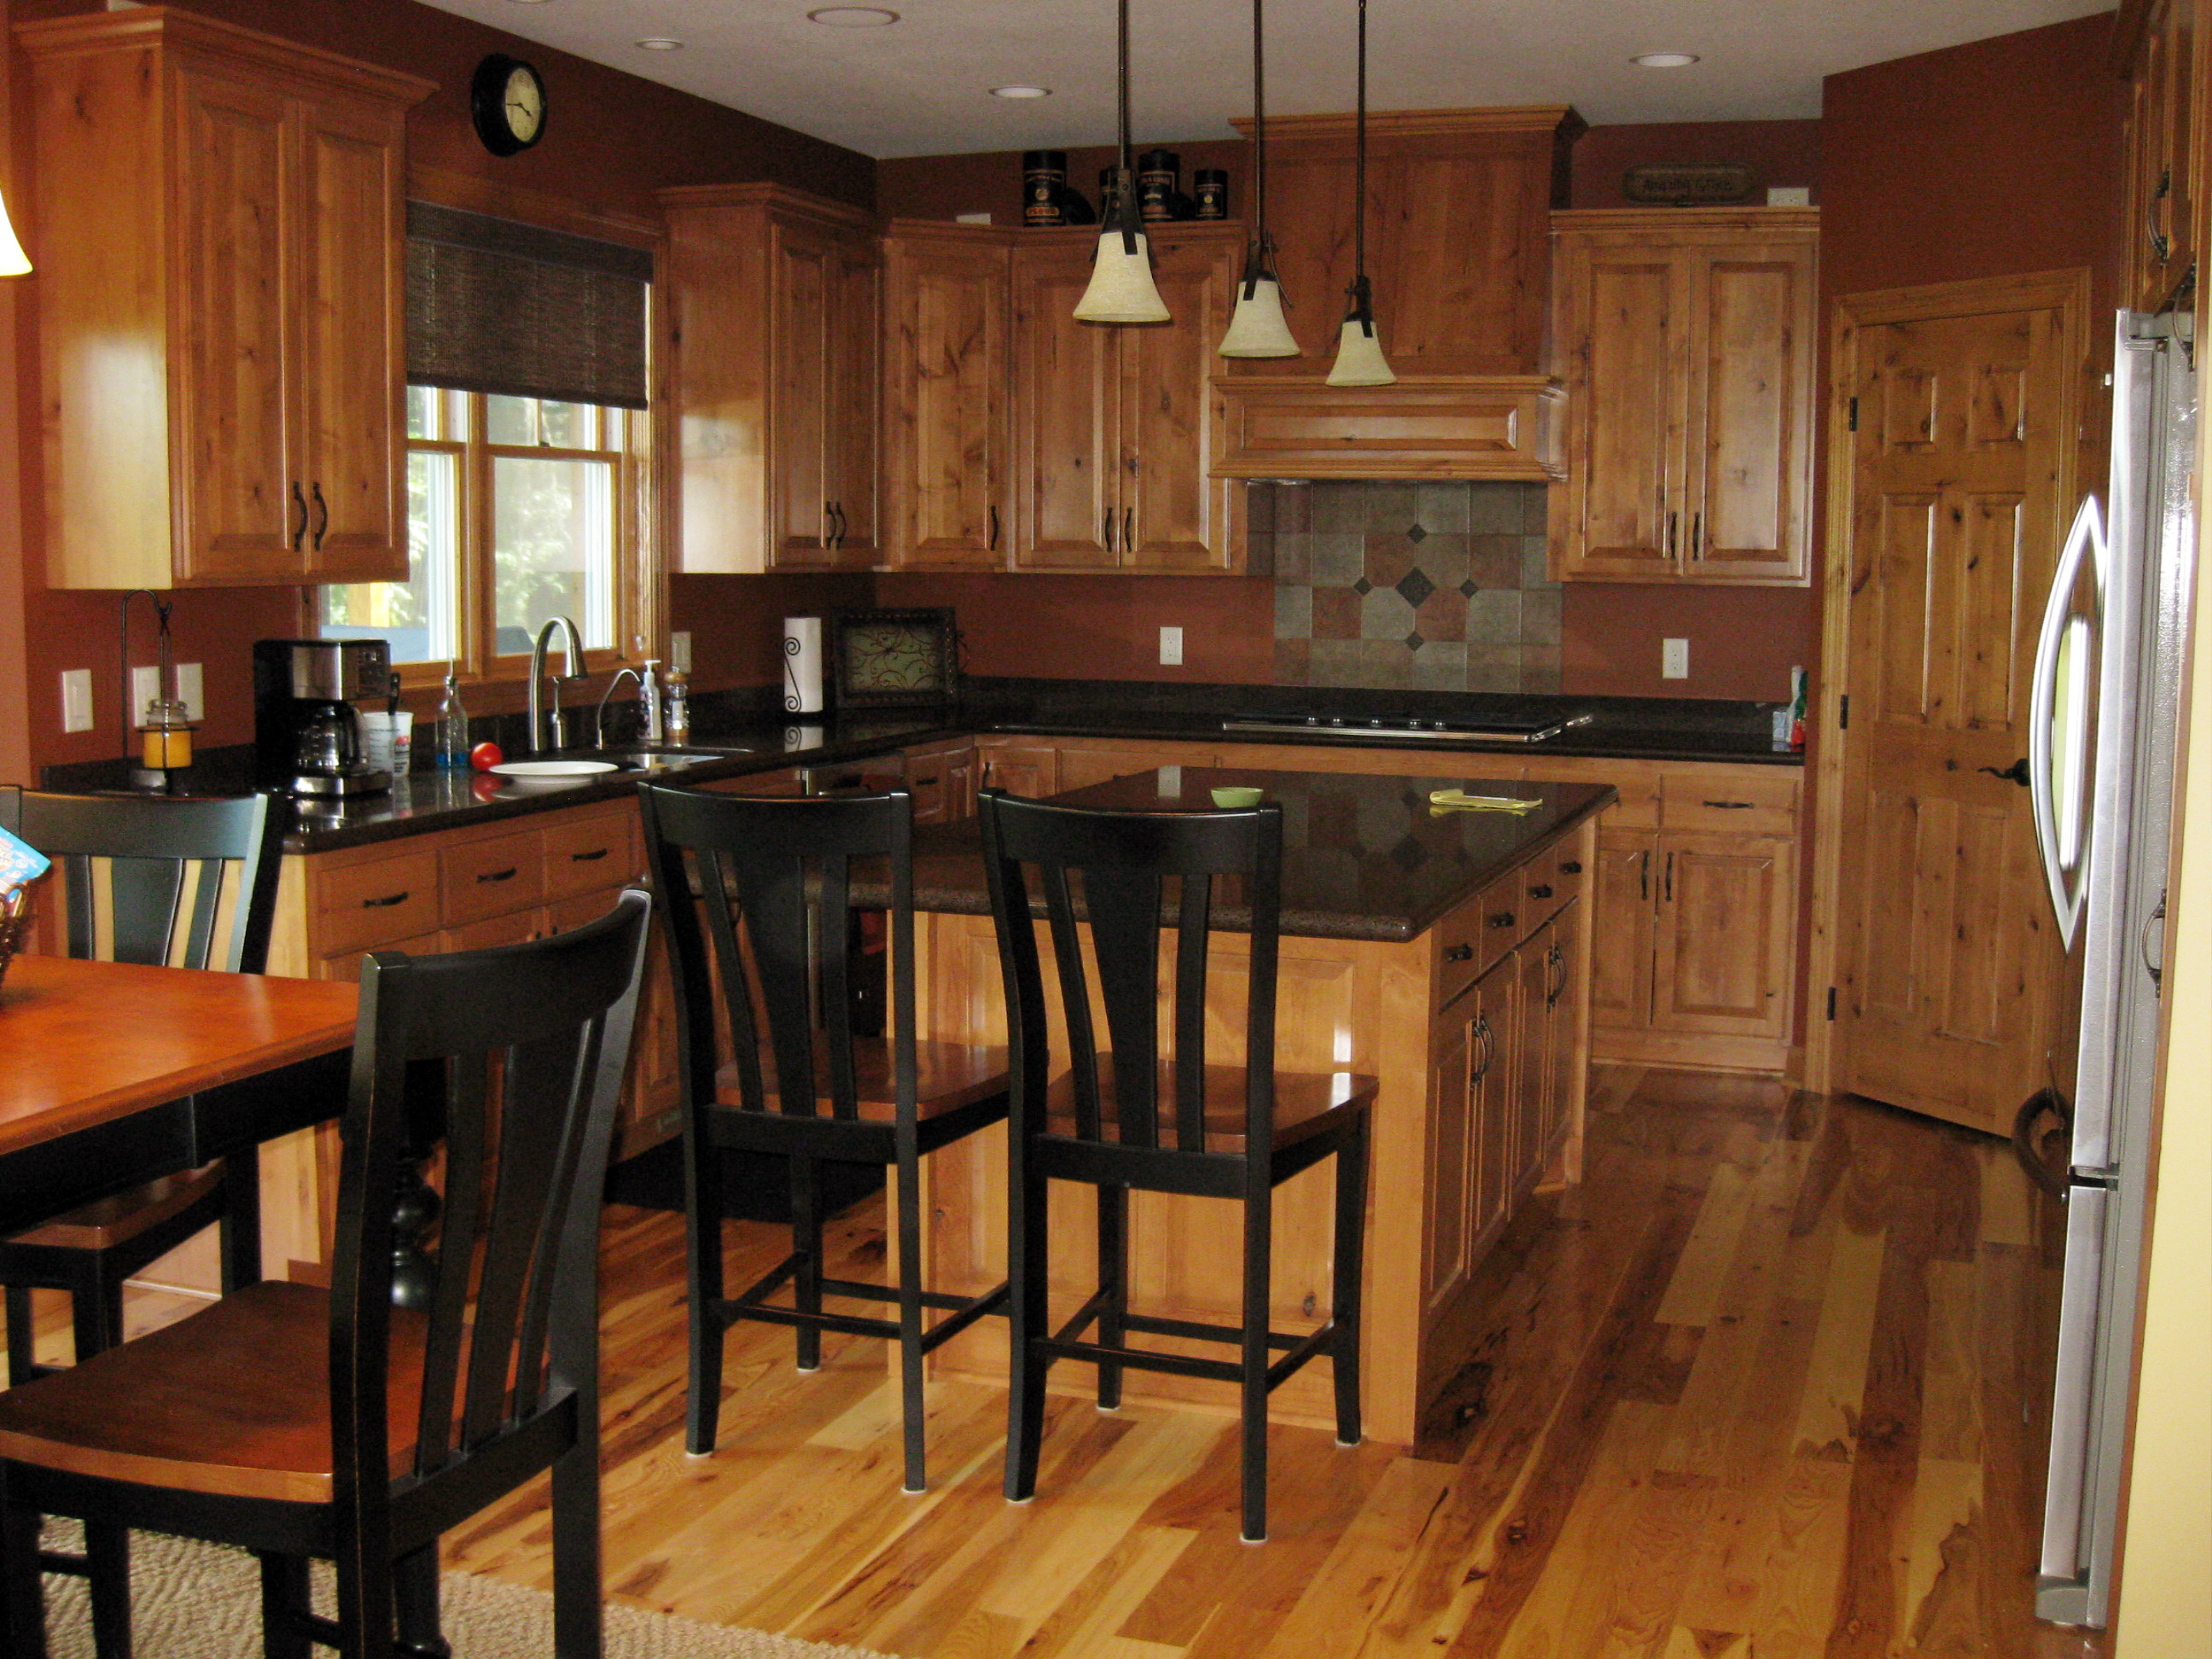 New kitchen with wood cabinets and dark stone countertops